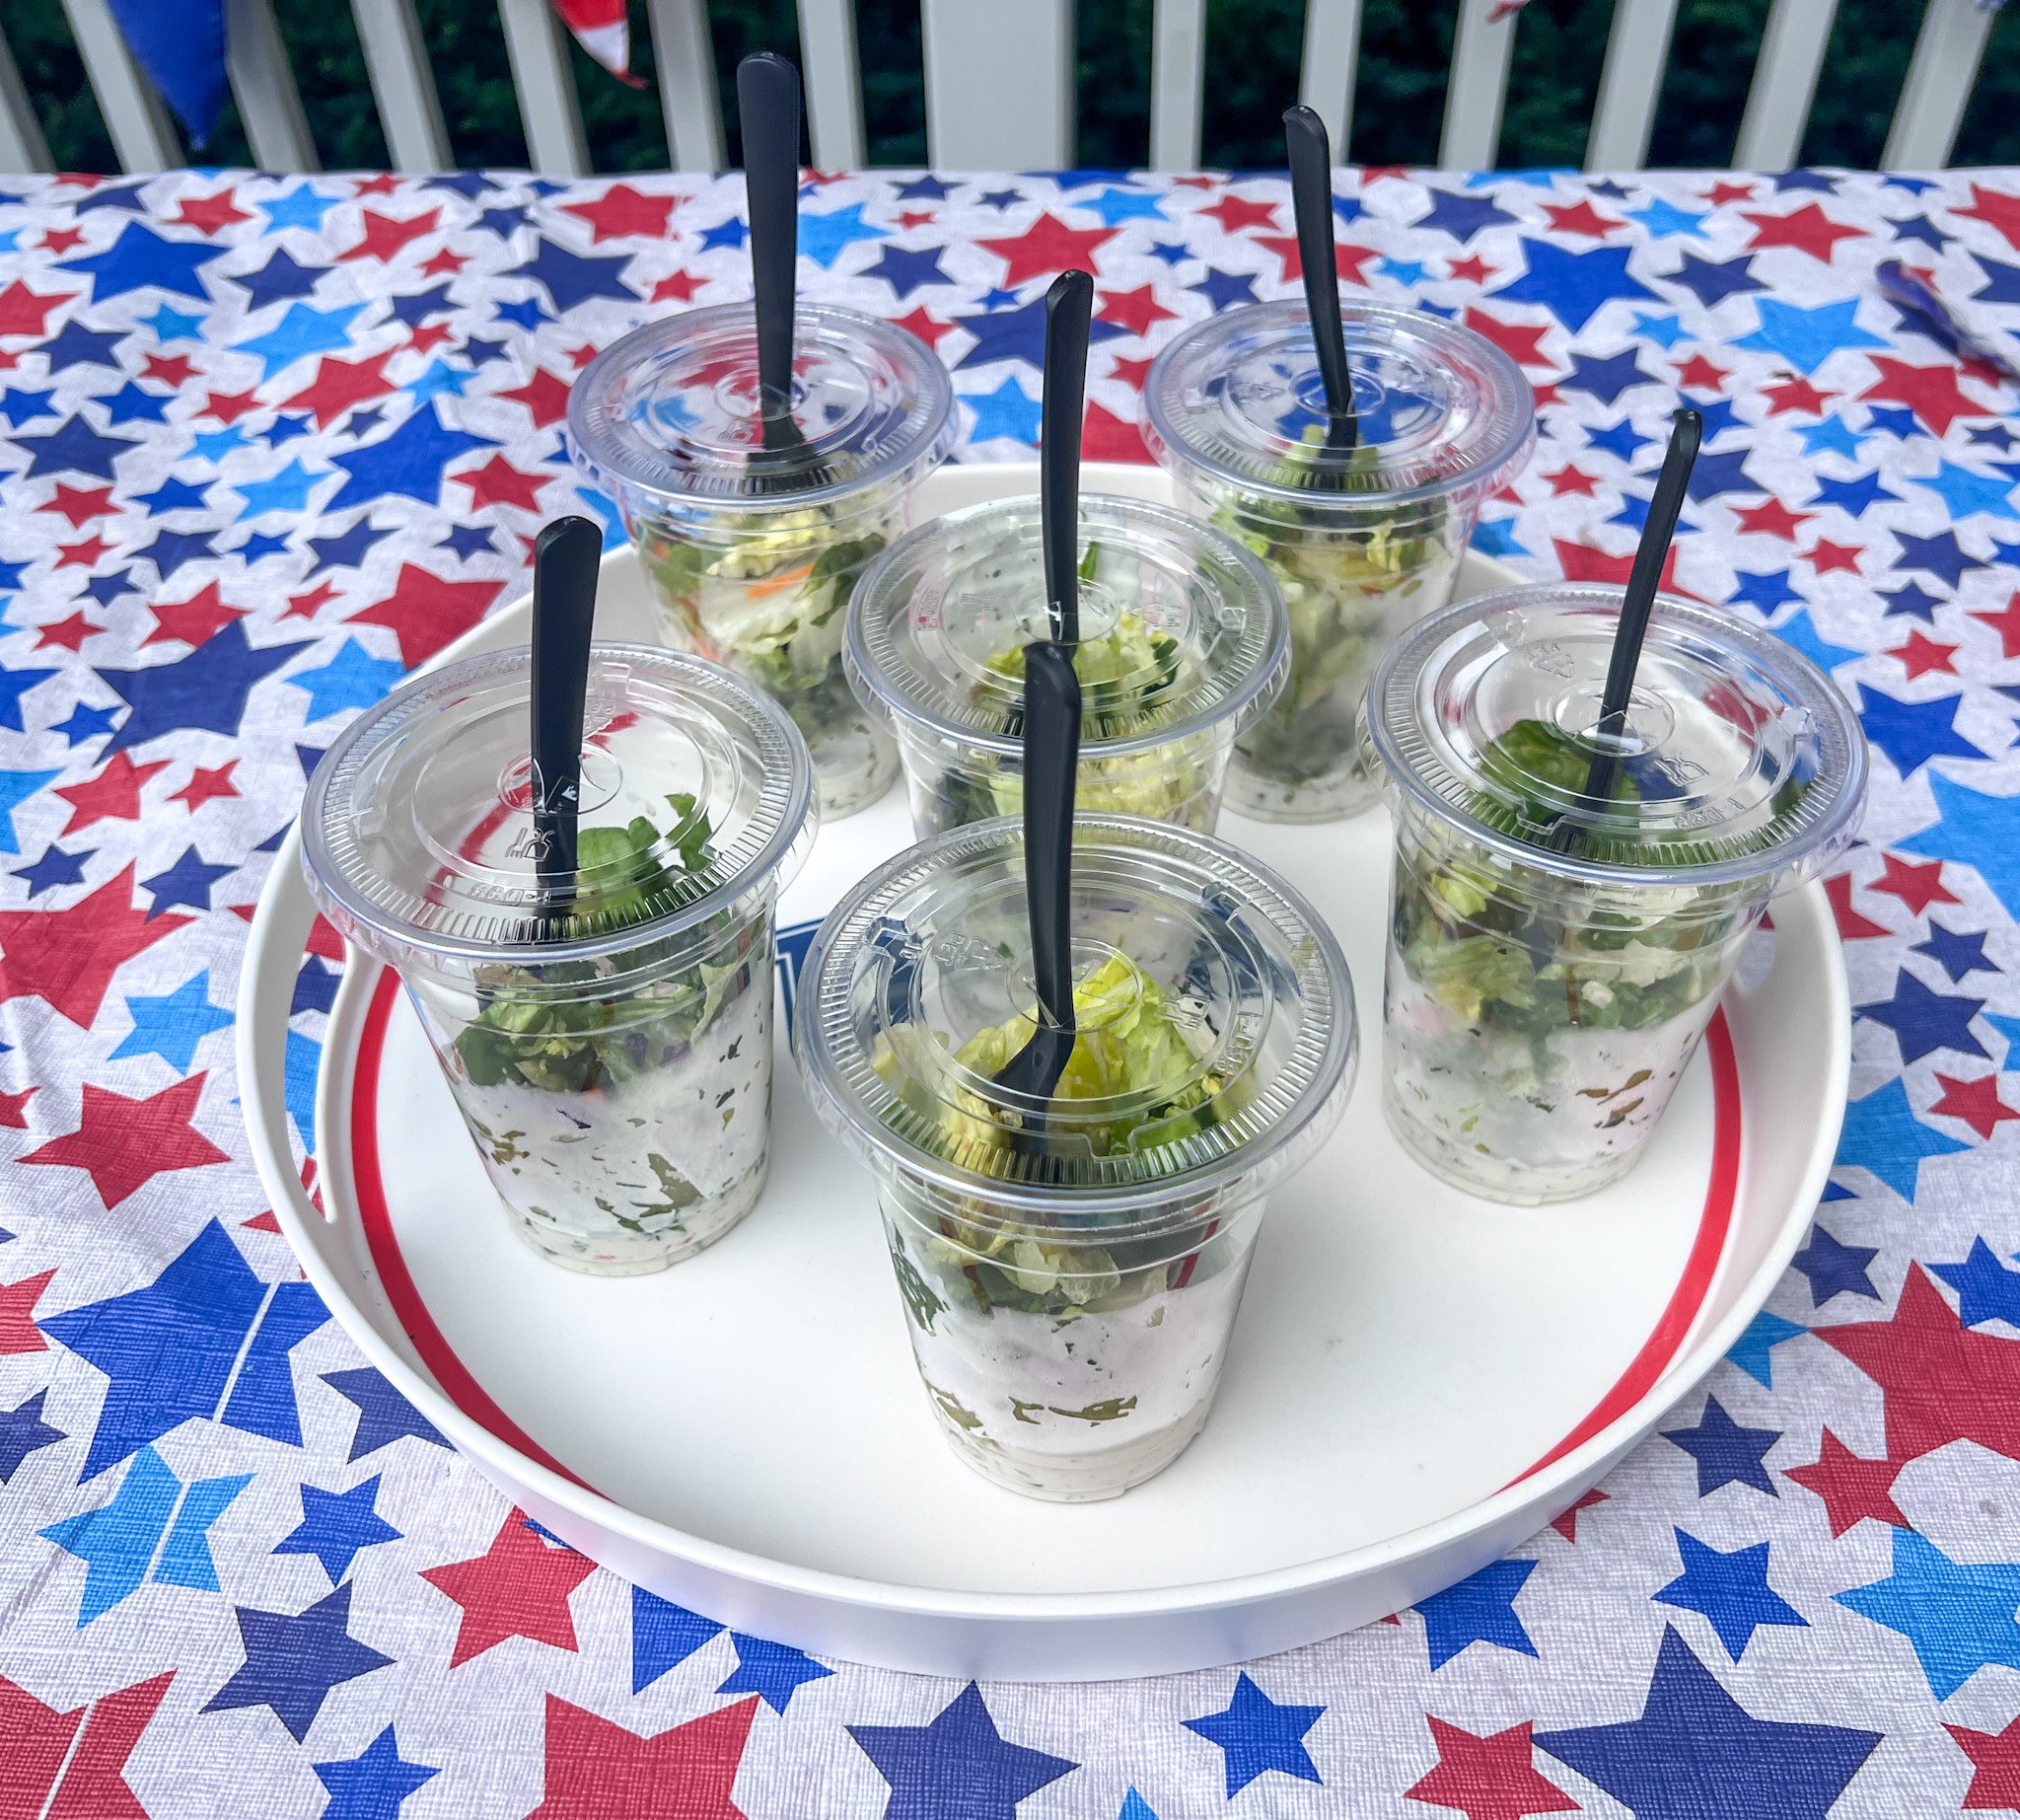 Cookout Ideas for 4th of July: 10 Awesome Hacks!